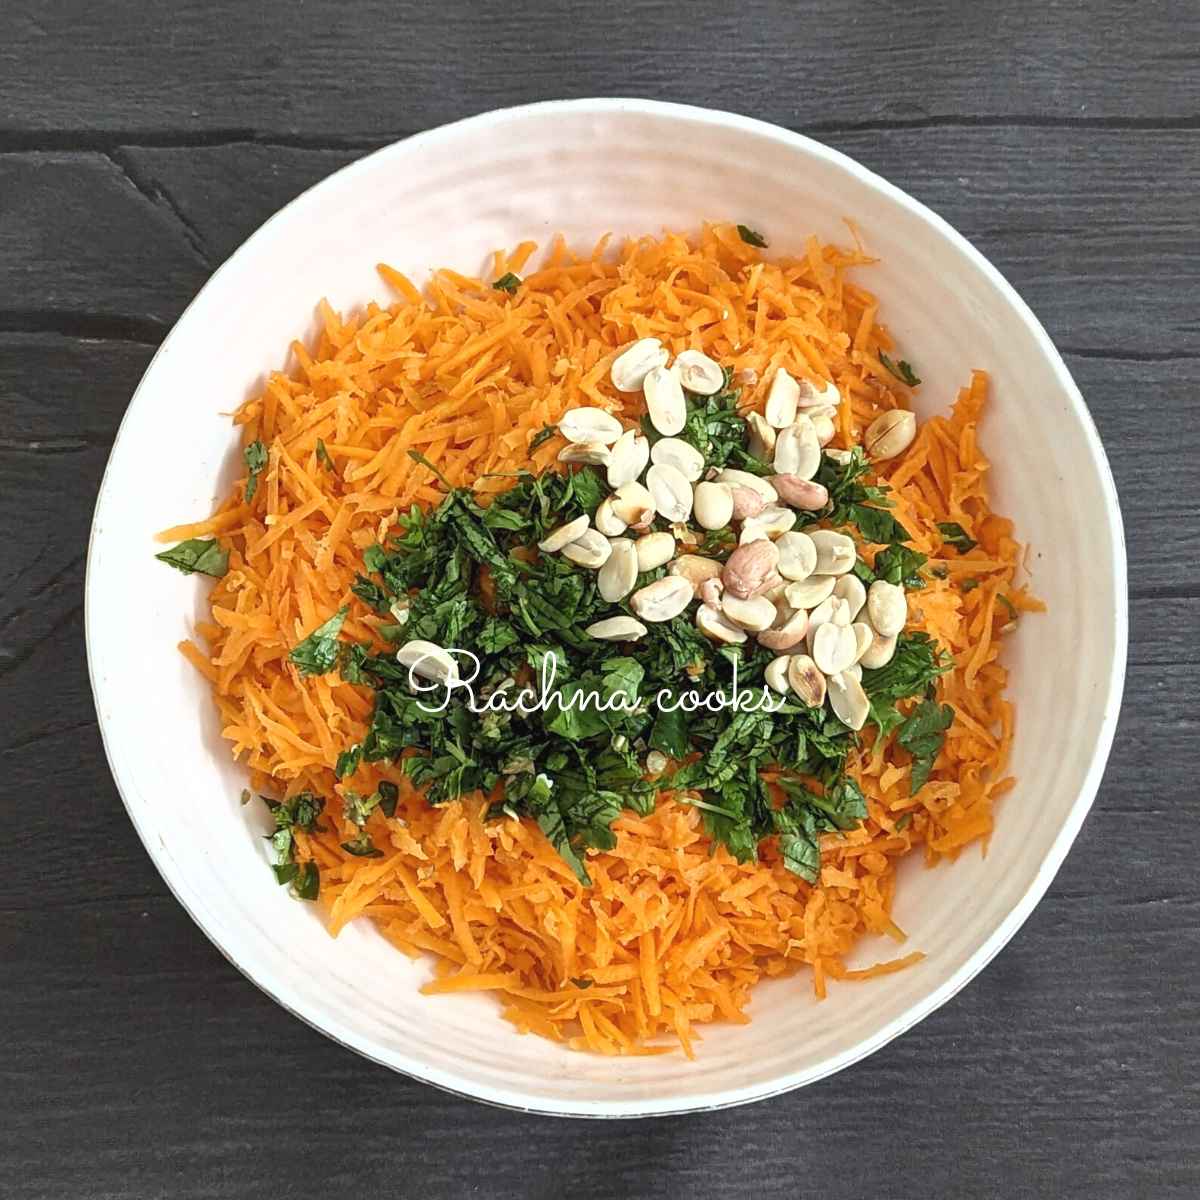 Grated carrot, chopped cilantro, chilli and roasted peanuts in a bowl.